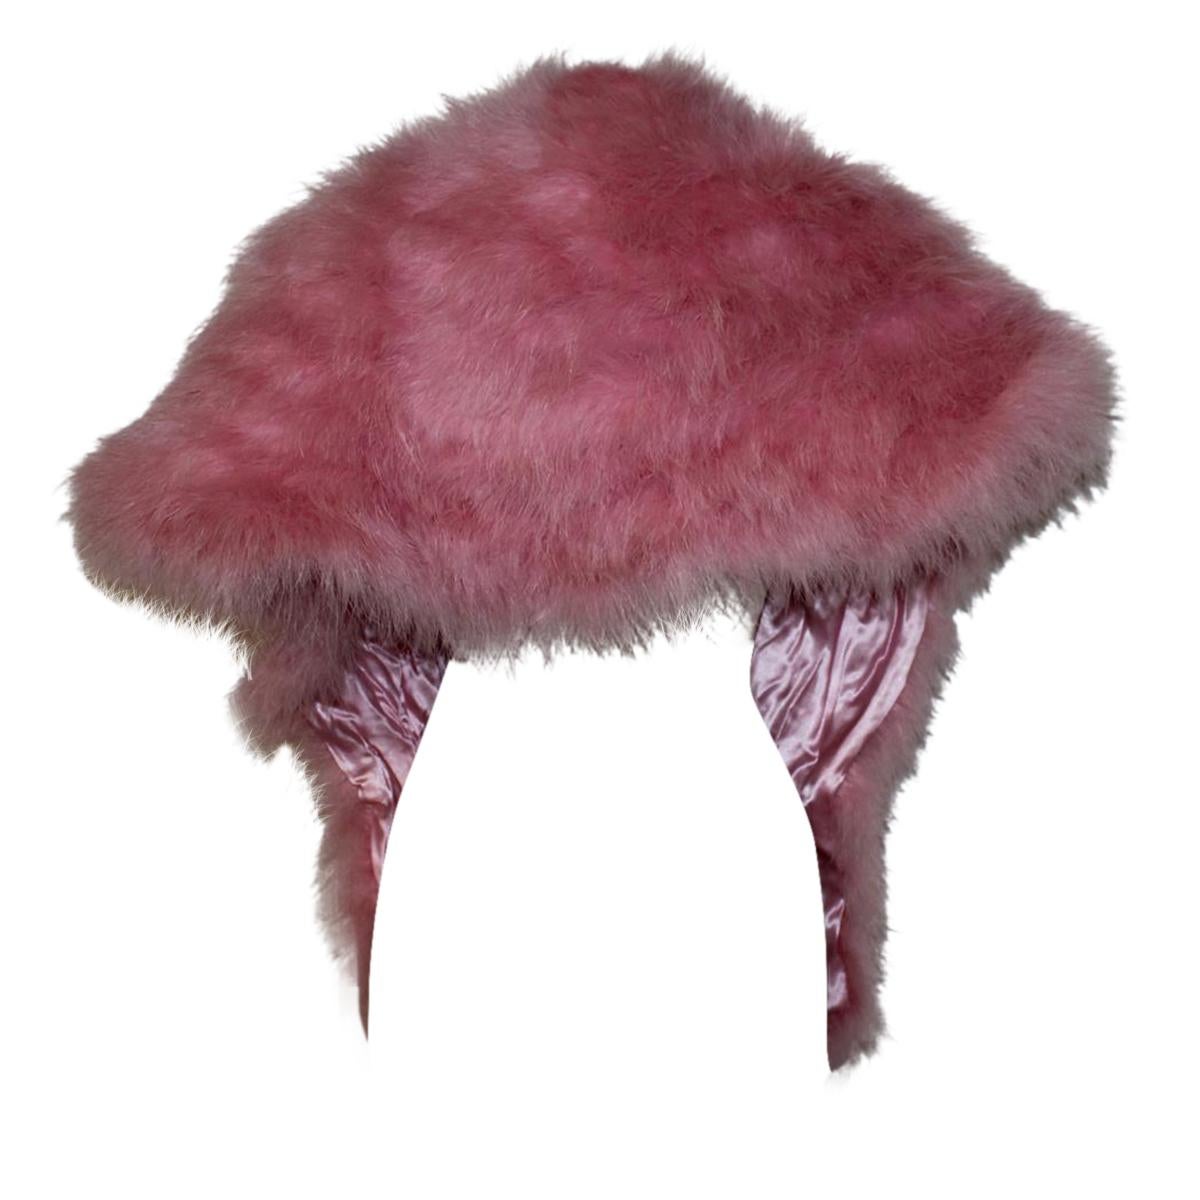 Beautiful and chic Carlo Zini stole
Swan feathers
Pink color
Total length about cm 170 (66.92 inches)
Maximum height cm 38 (14.96 inches)
Worldwide express shipping included in the price !